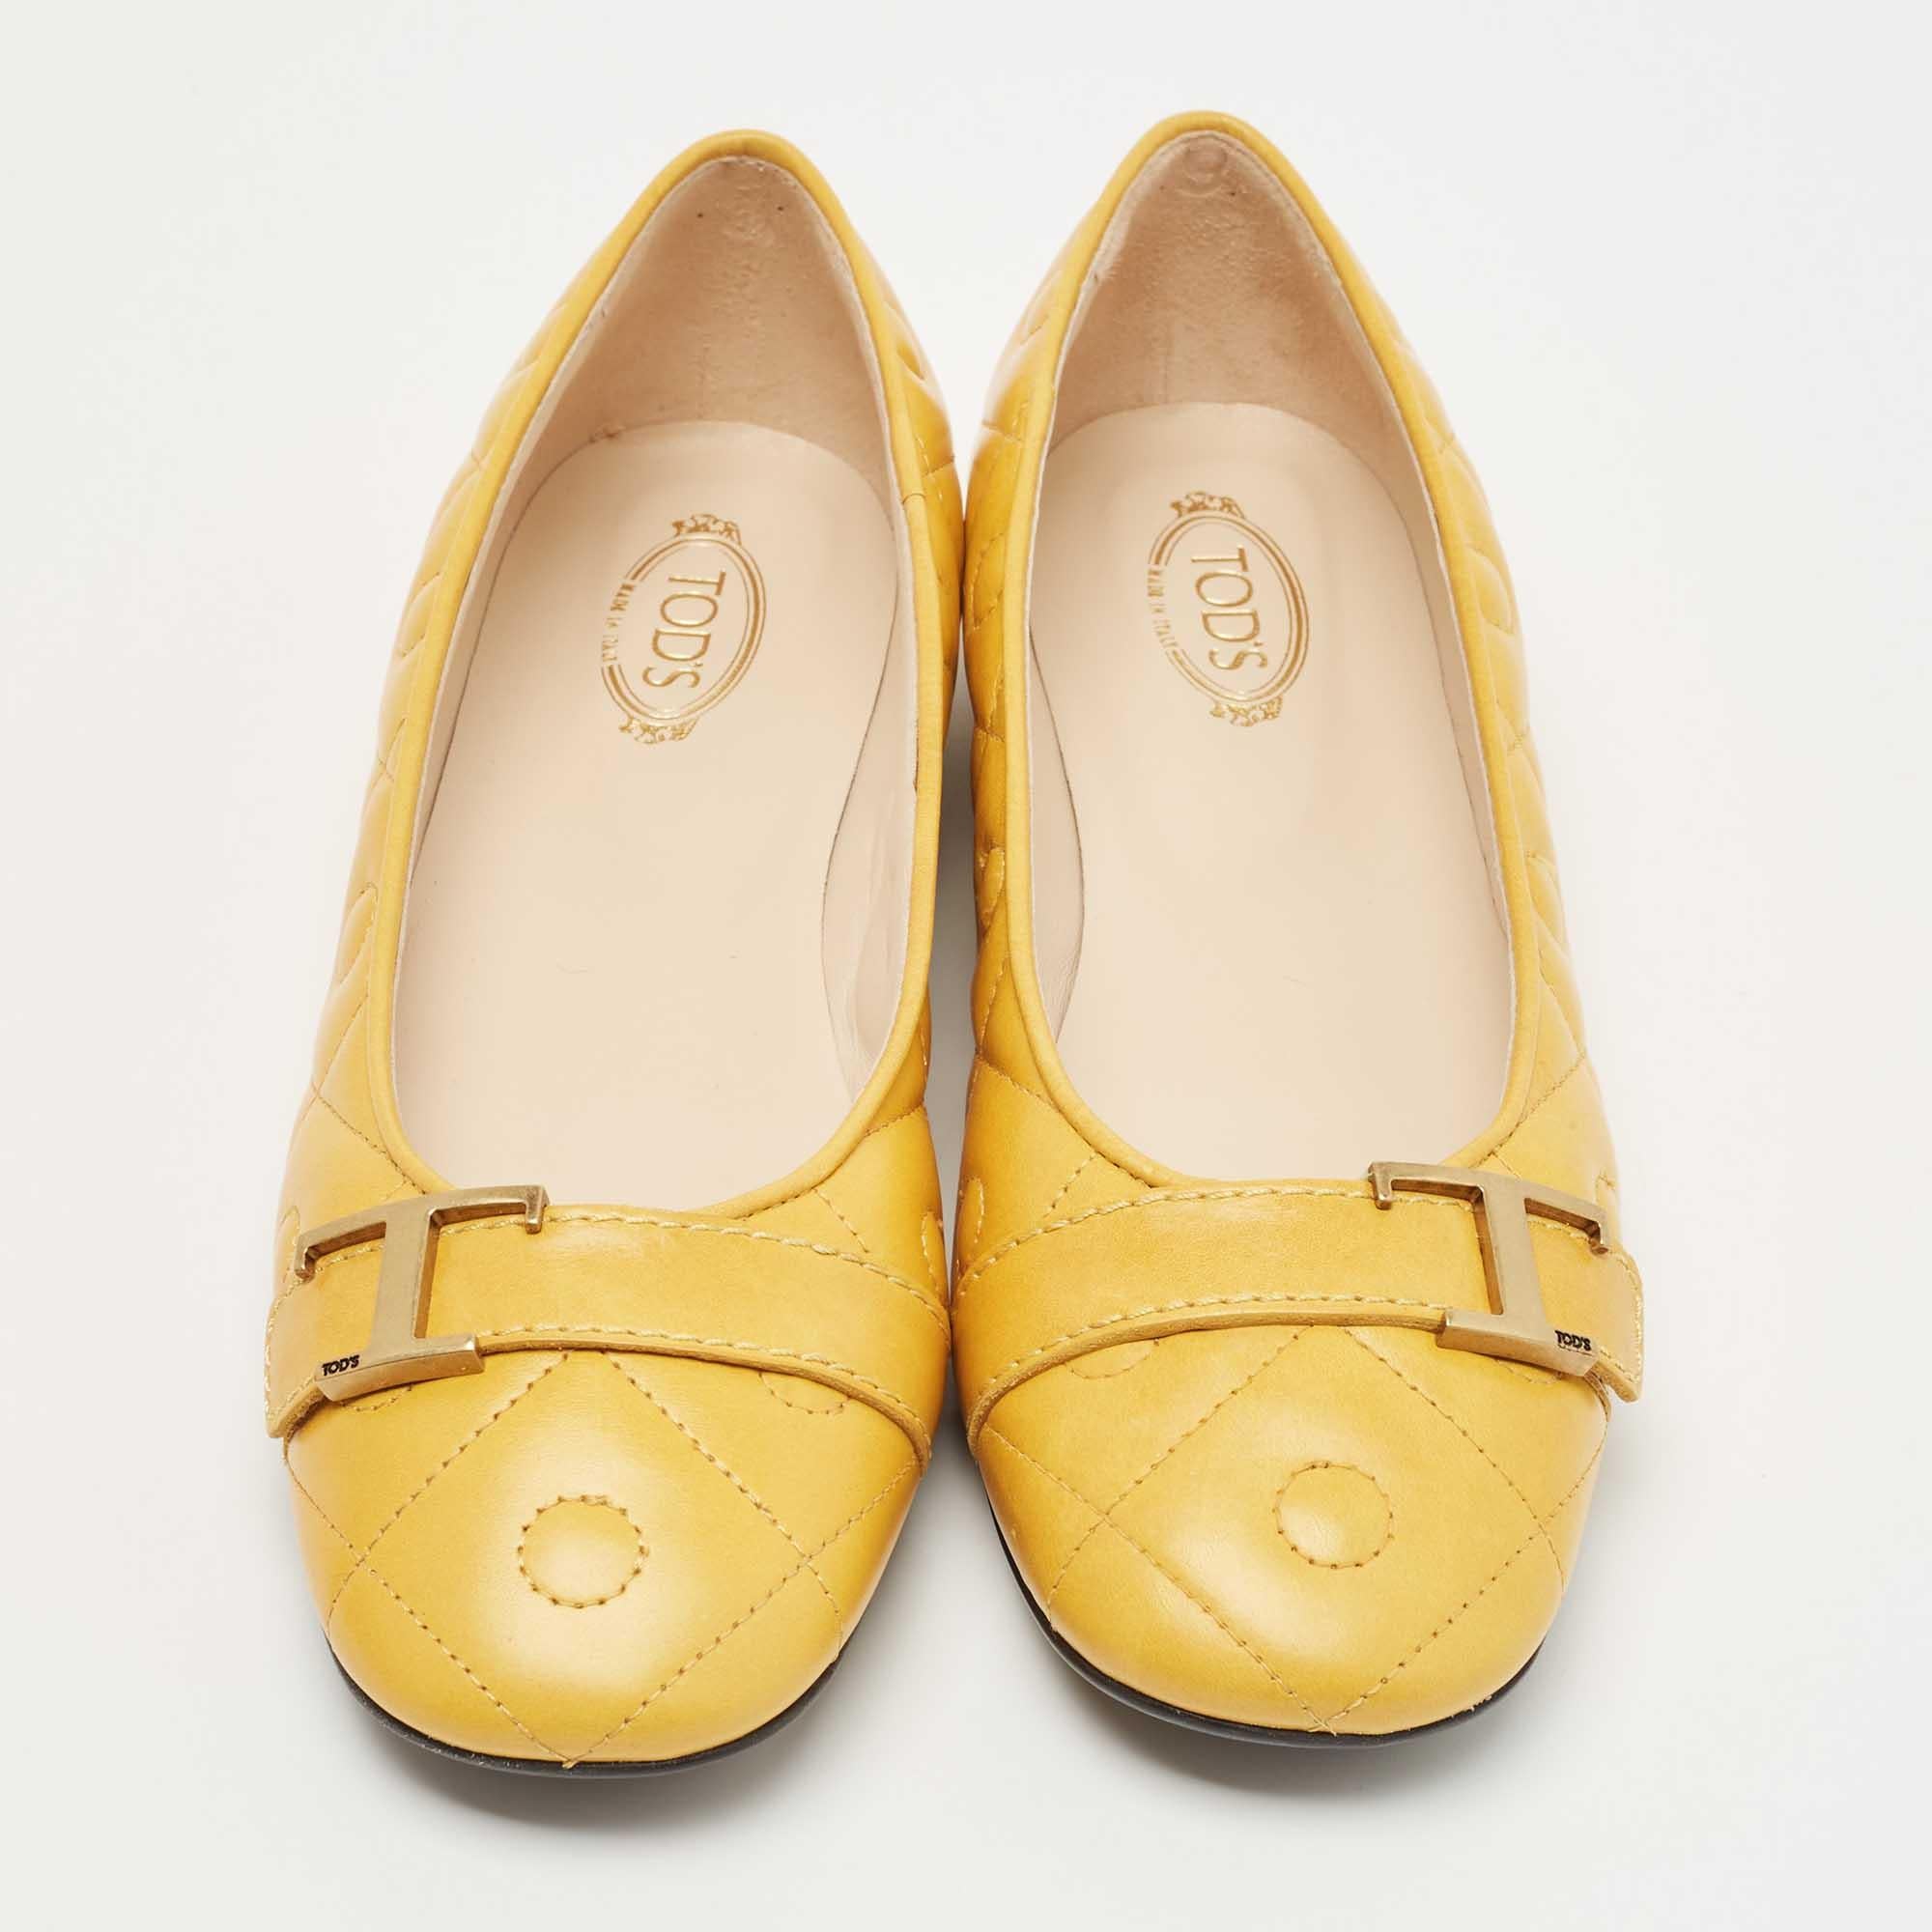 Complement your well-put-together outfit with these authentic designer ballet flats. Timeless and classy, they have an amazing construction for enduring quality and comfortable fit.

Includes: Original Dustbag, Original Box, Info Booklet

